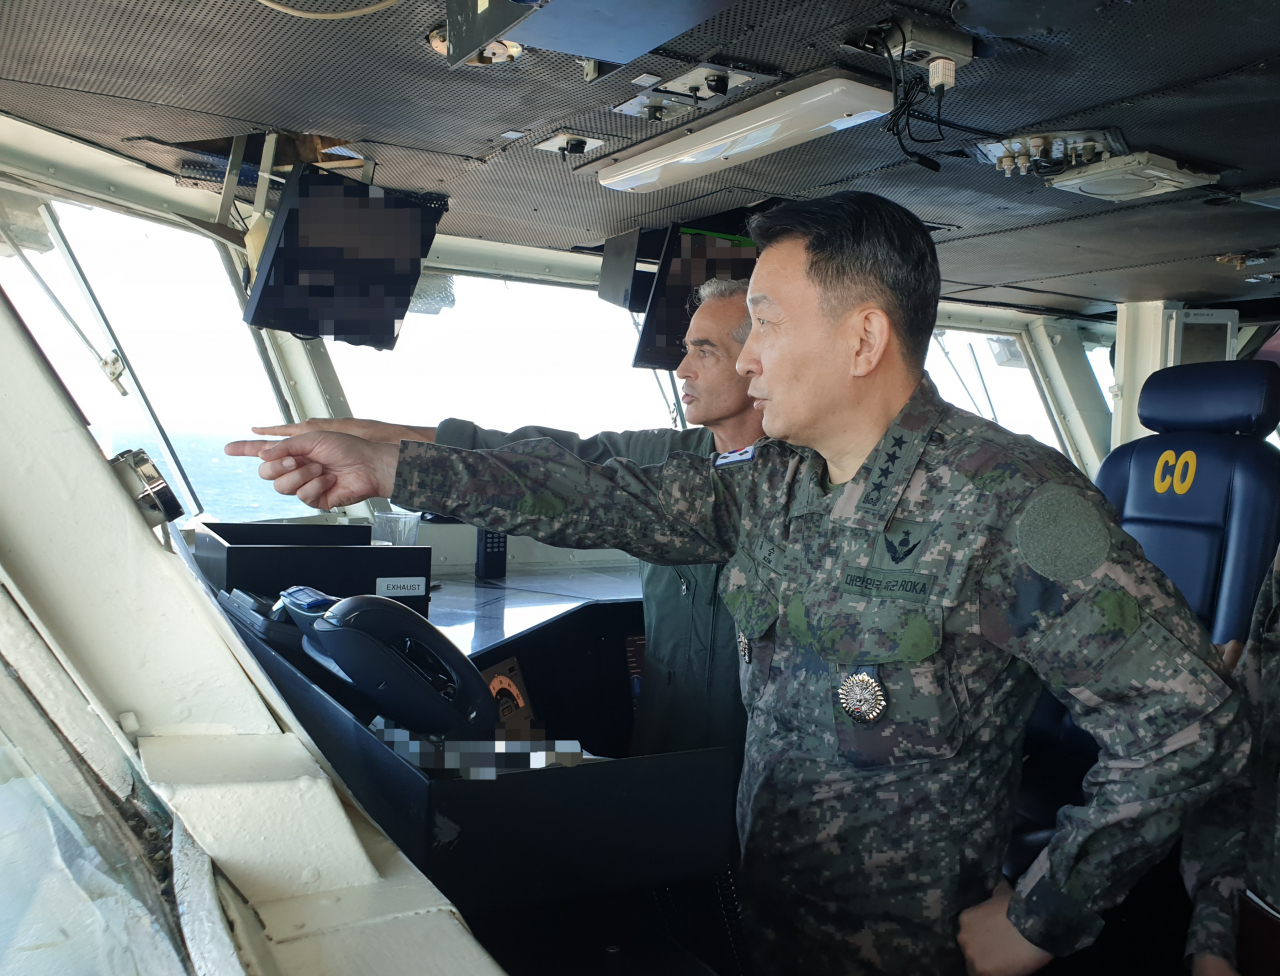 South Korea's Joint Chiefs of Staff Chairman Gen. Kim Seung-kyum (right) and UN Navy Capt. Craig Sicola, who serves as the commanding officer of the USS Nimitz, are on board the US aircraft carrier during combined maritime exercises between the South Korean and US navies staged in international waters south of Jeju Island on Monday. (Joint Chiefs of Staff)